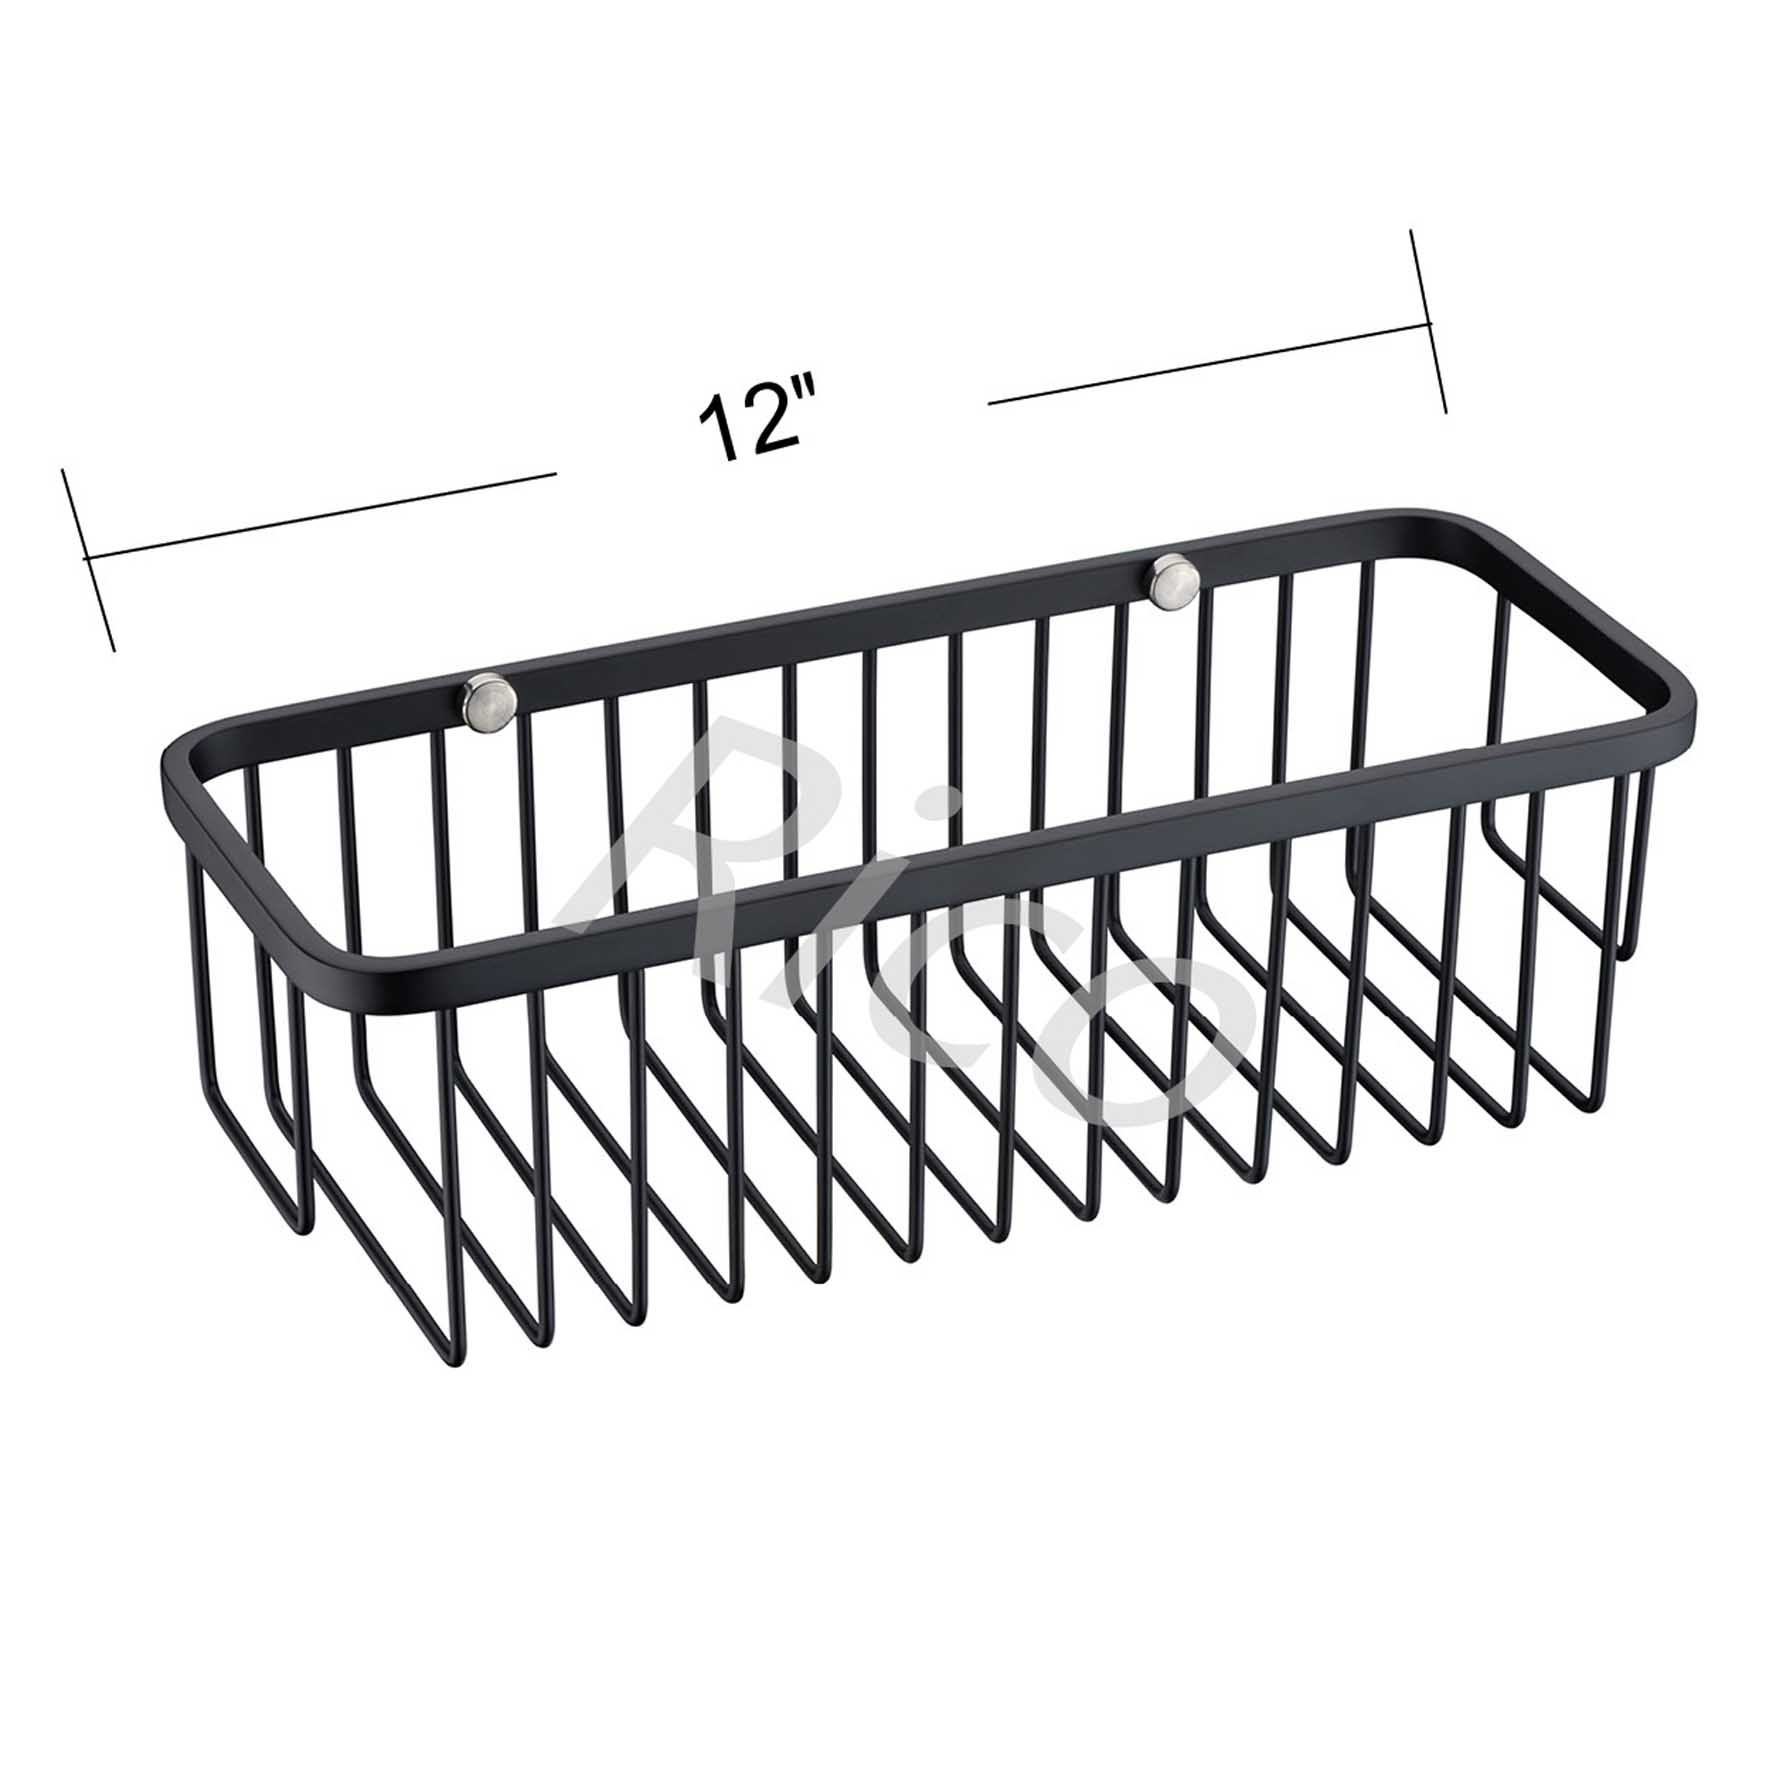 Rico : Stainless Steel Soap Basket (Black) – RICO-R11810